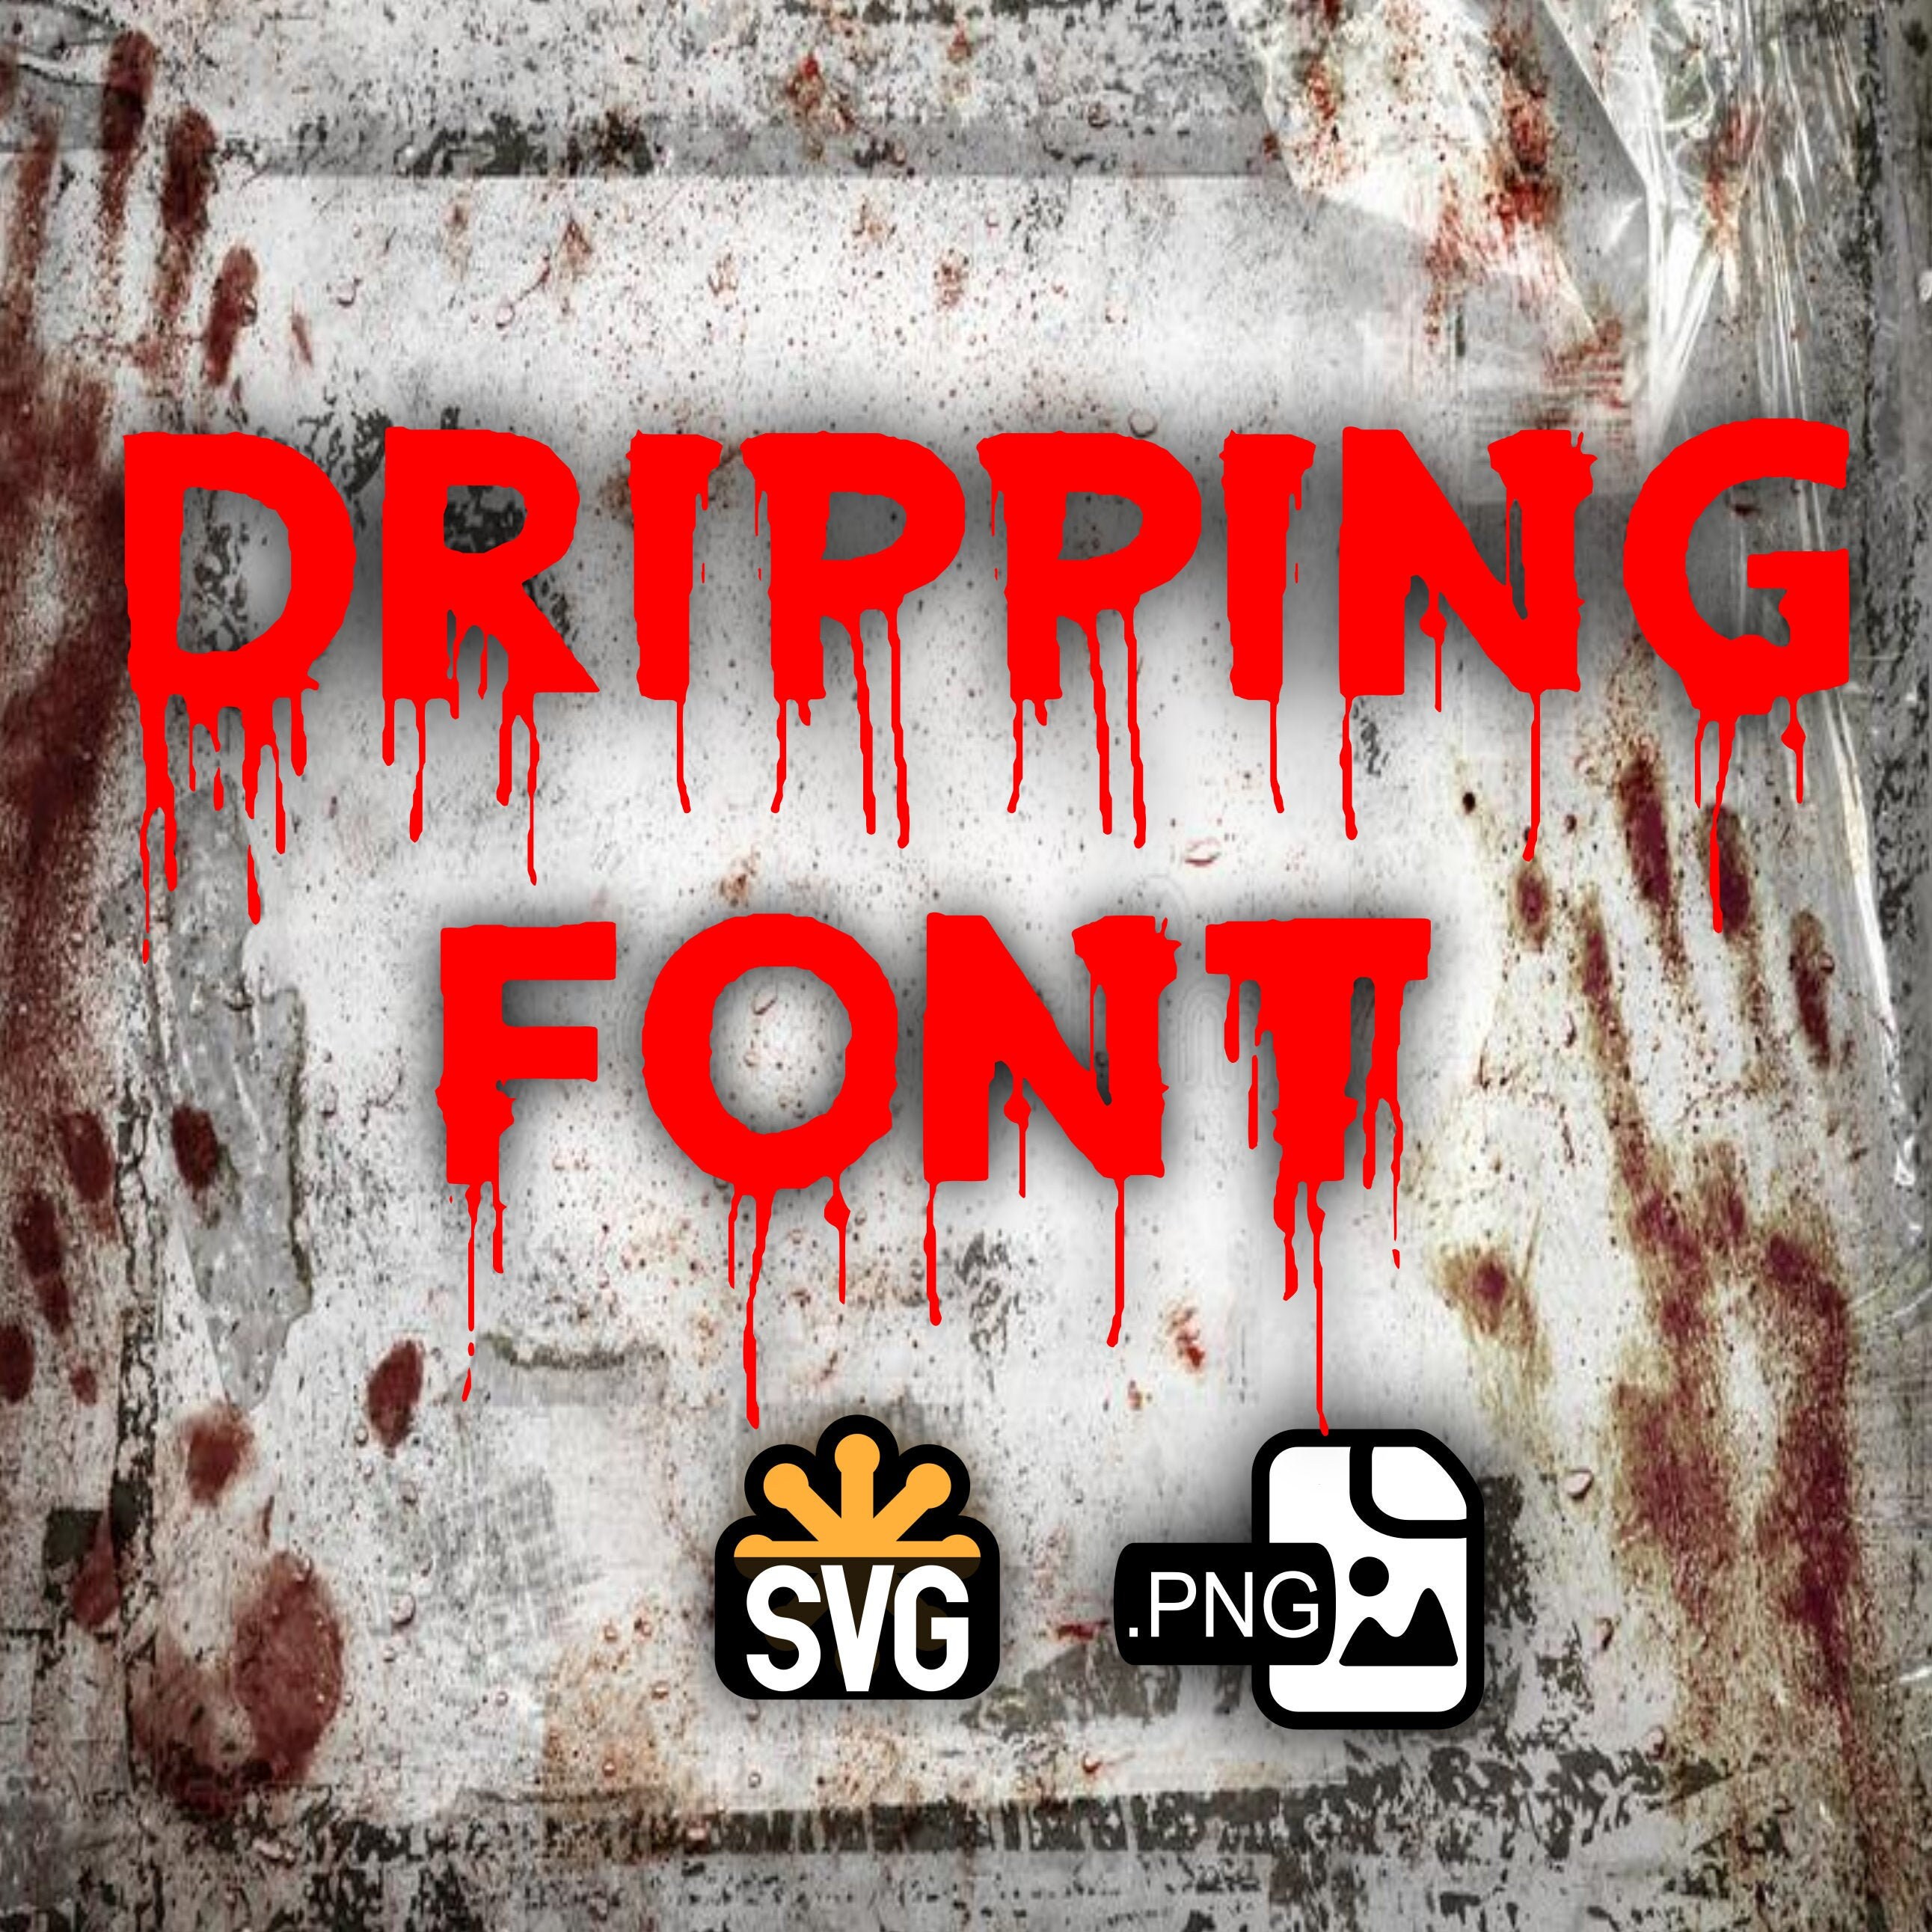 Dripping Svg Dripping BLOODY FONT Svg Dripping Bloody - Etsy